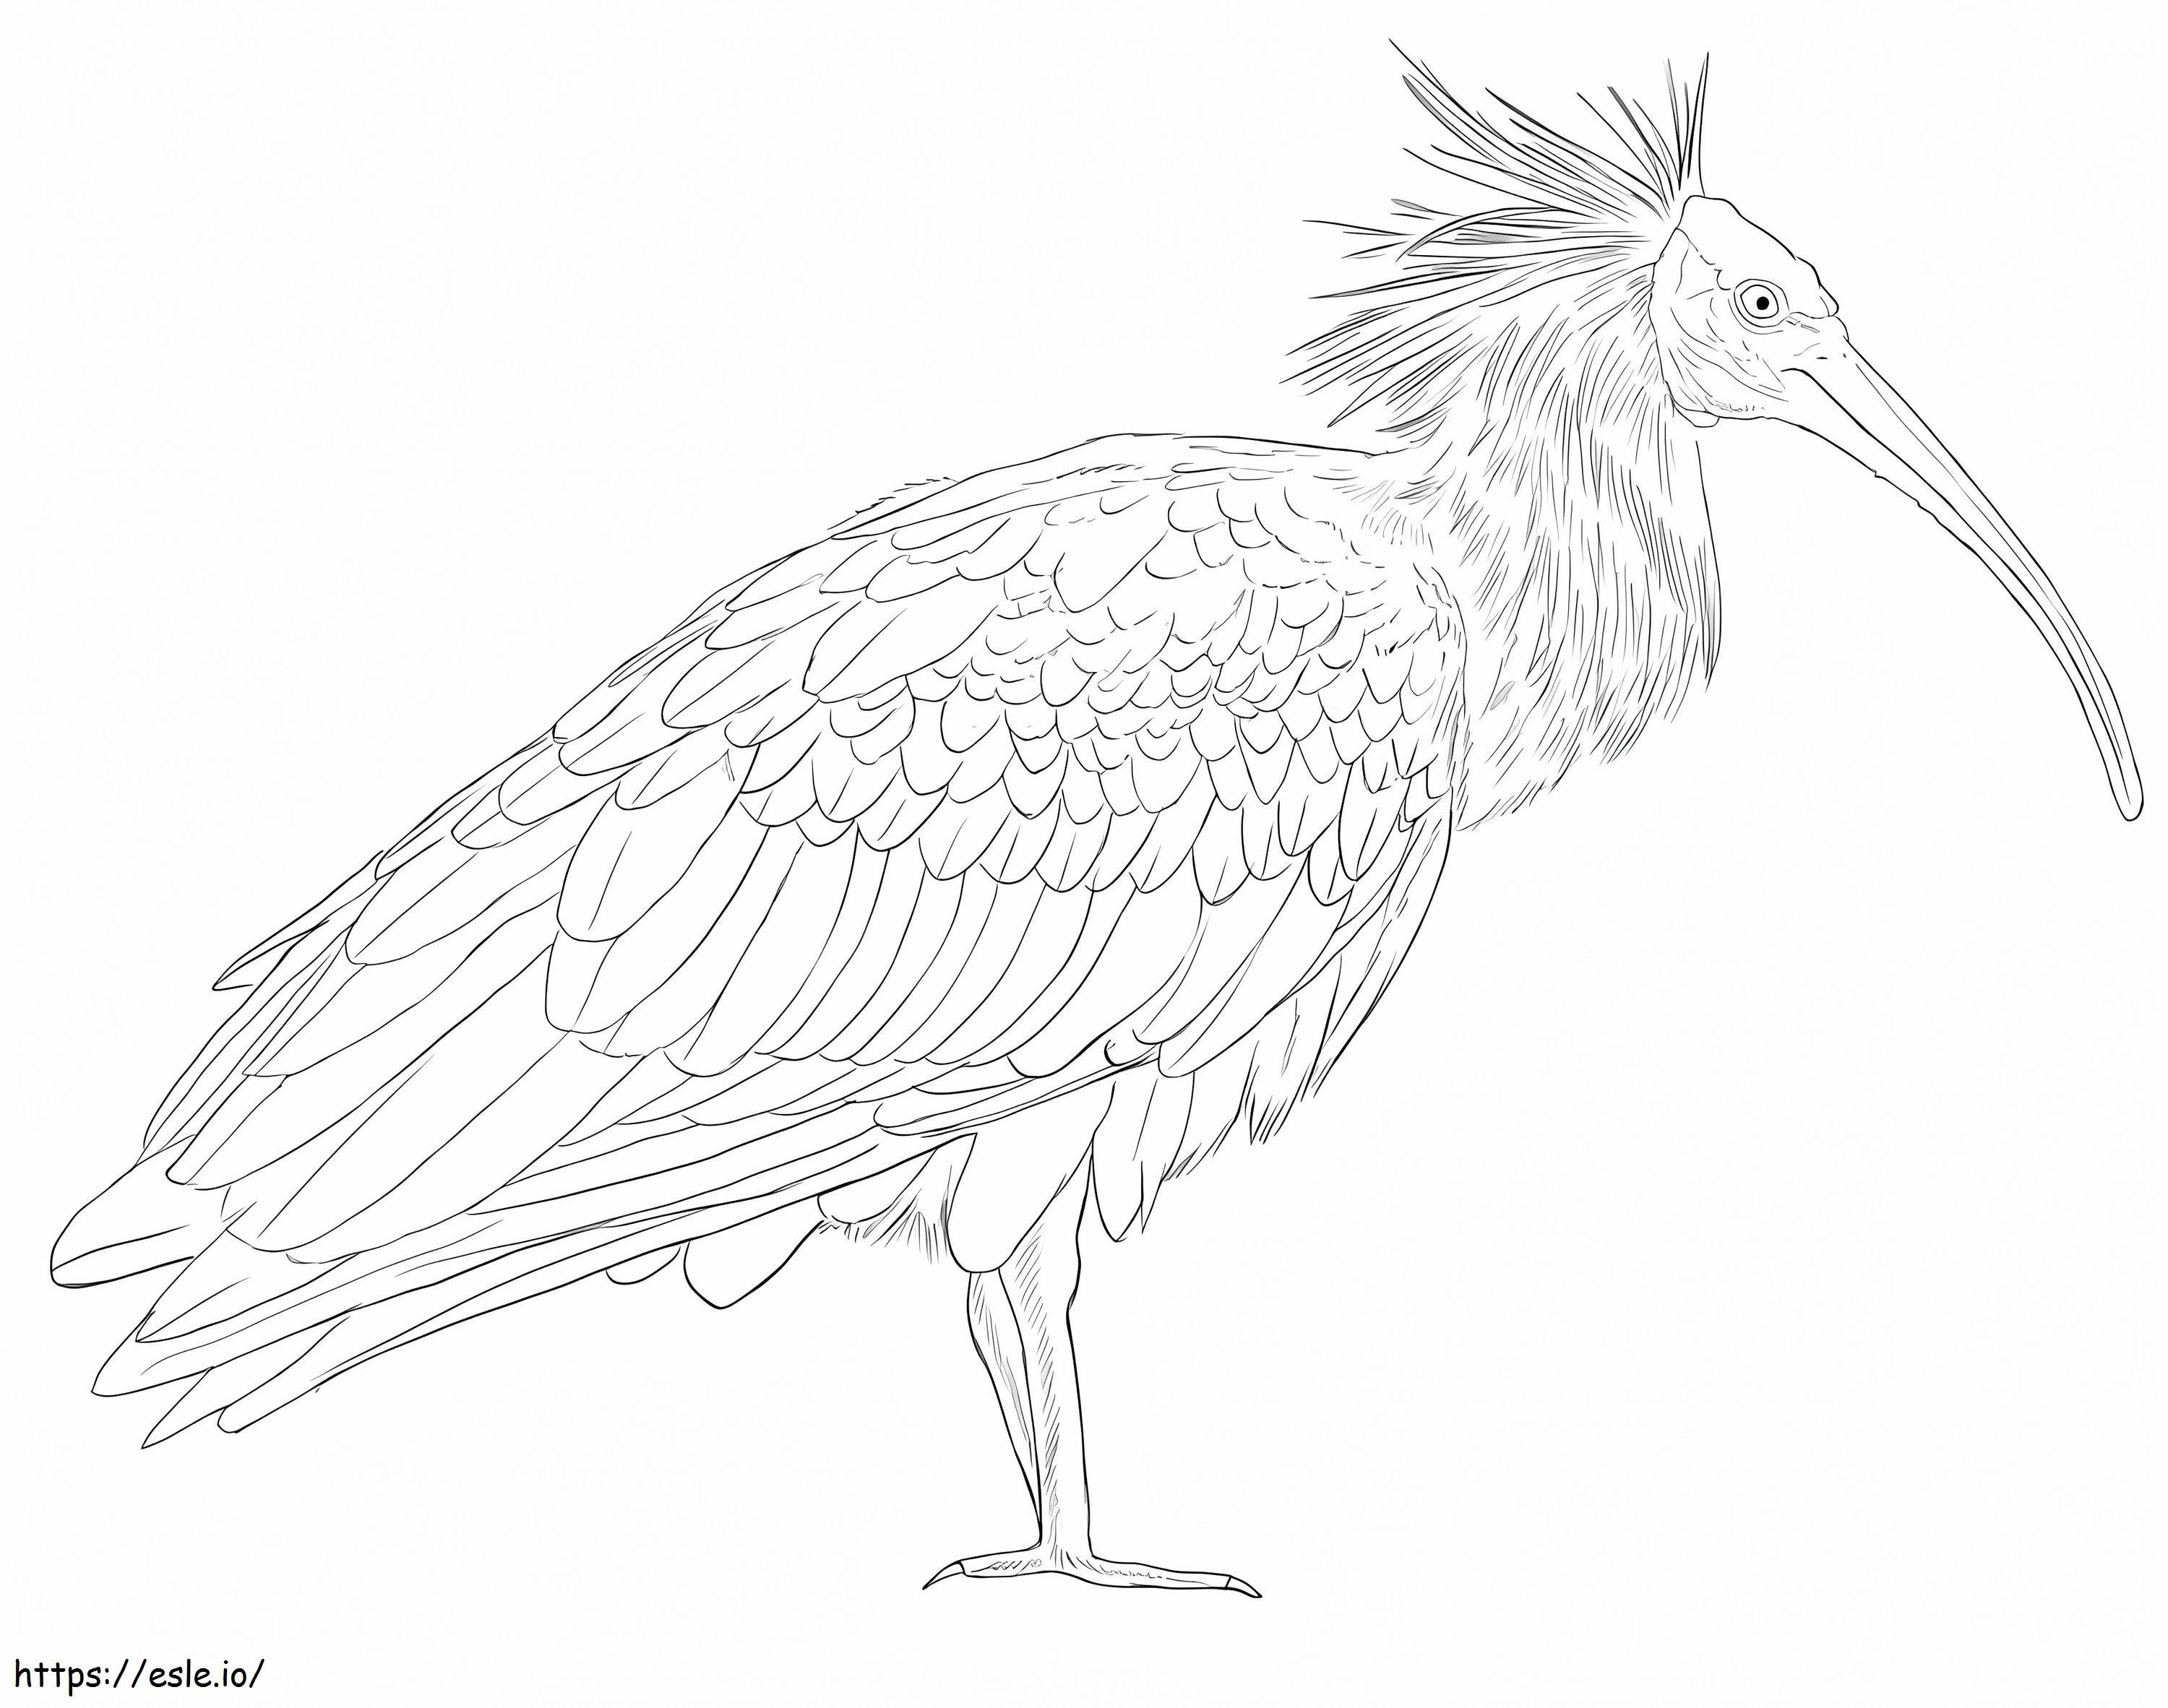 Northern Bald Ibis coloring page